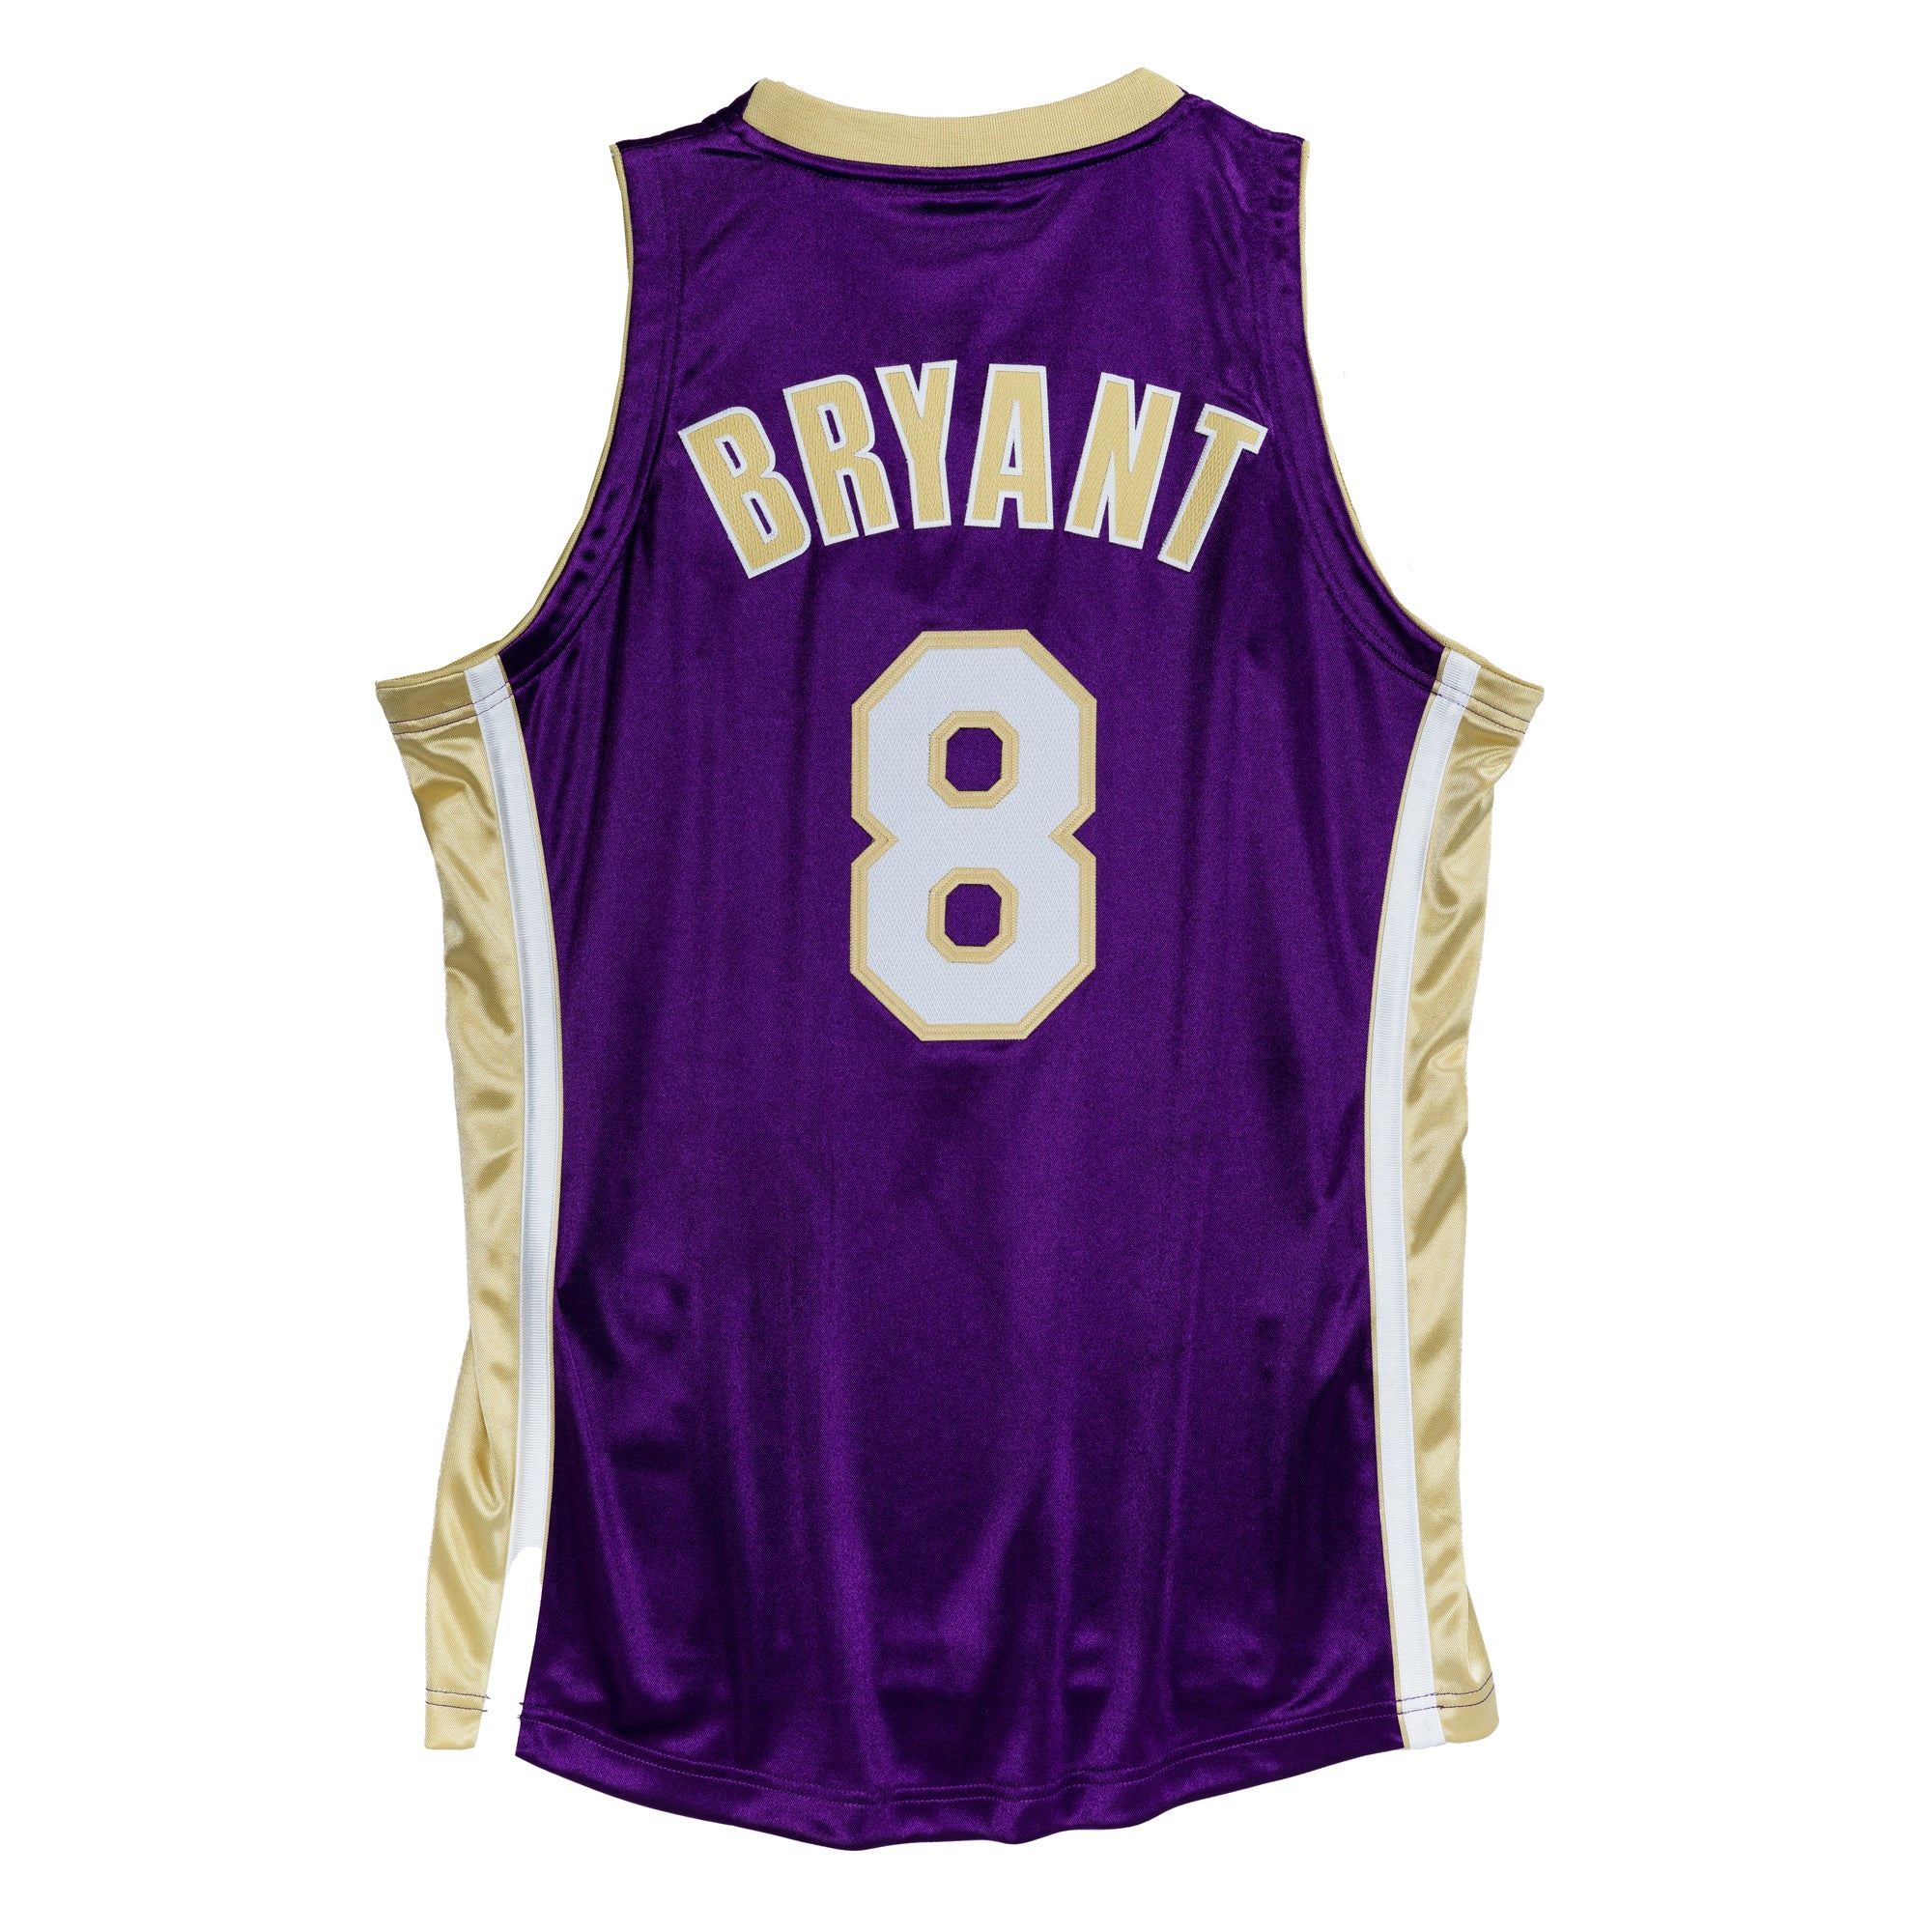 Kobe Bryant's Jerseys, Shoes, and Other Memorabilia to Be